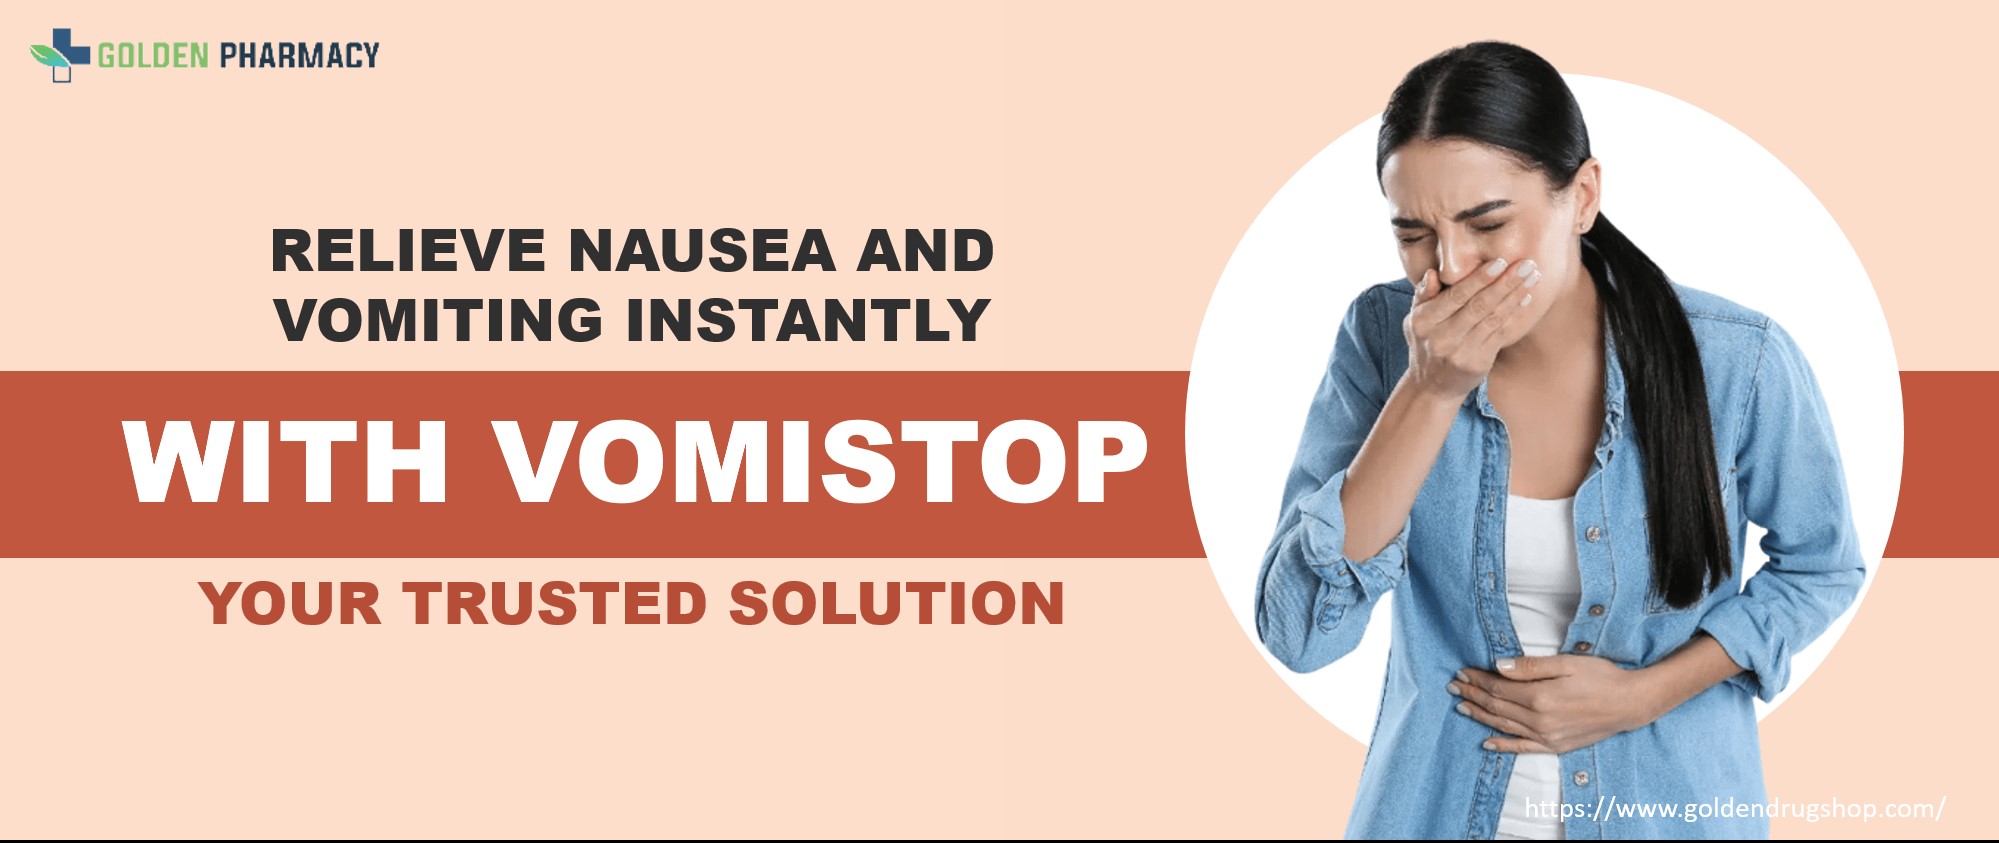 Relieve Nausea and Vomiting Instantly with Vomistop: Your Trusted Solution